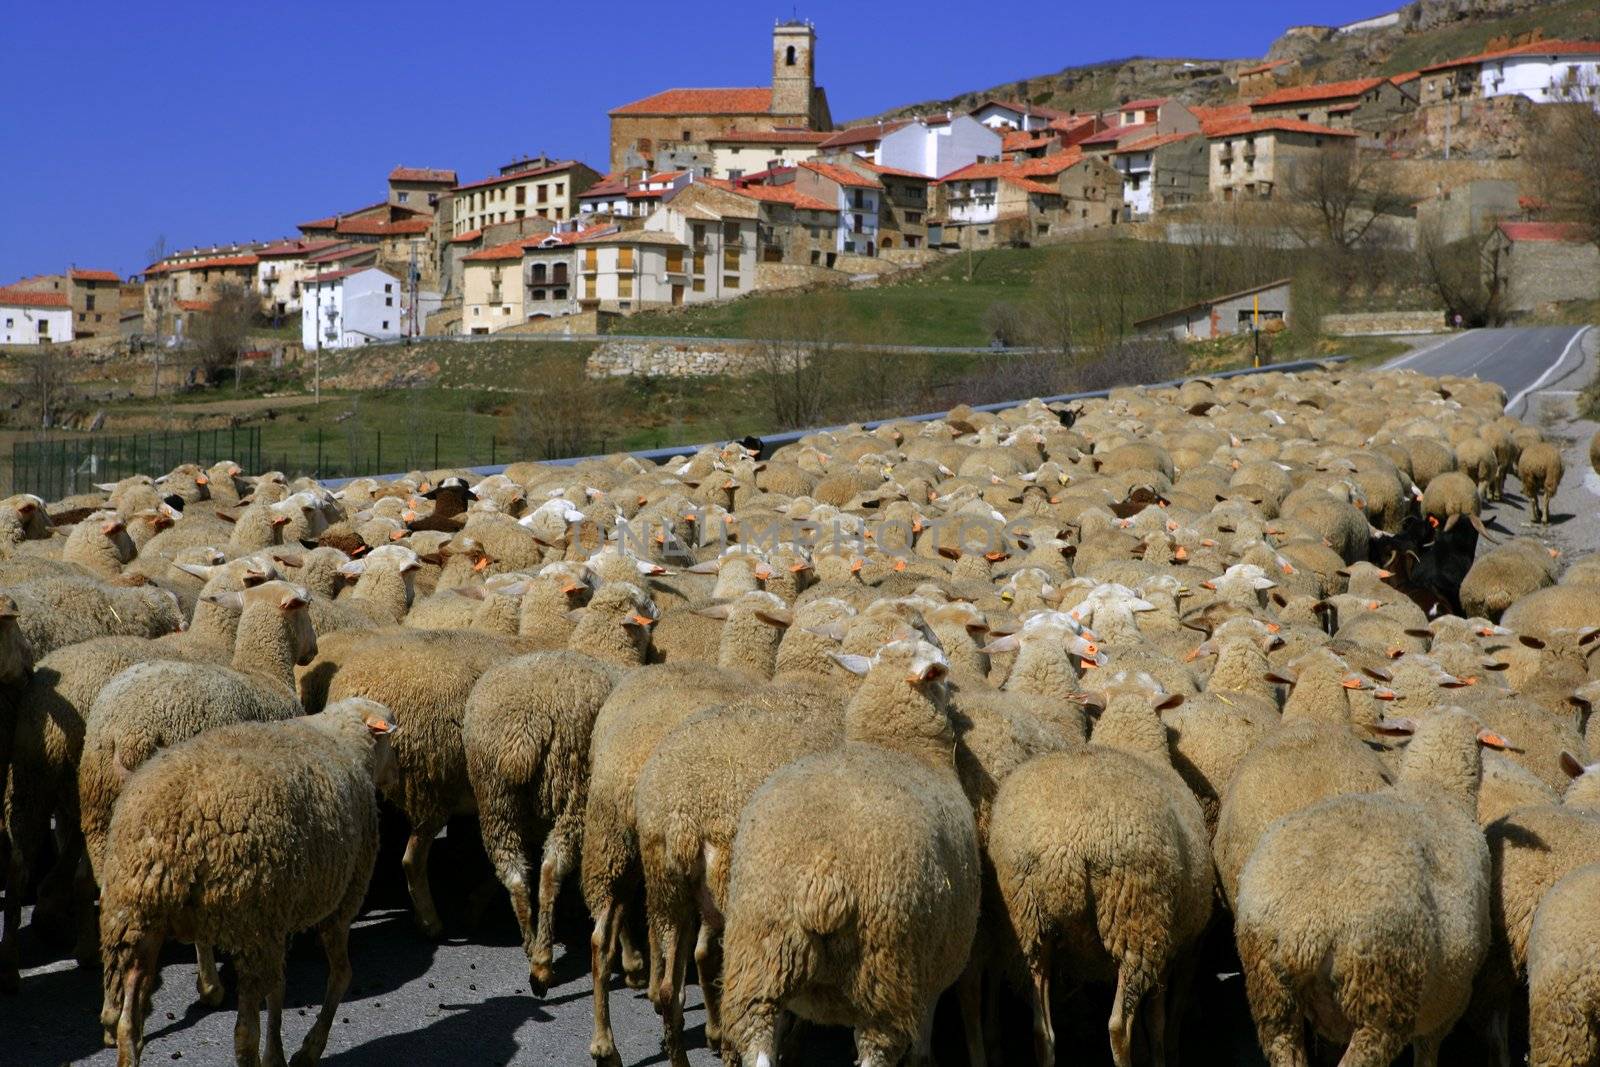 Lamb herd, sheep and gout flock walking on Spanish typical village